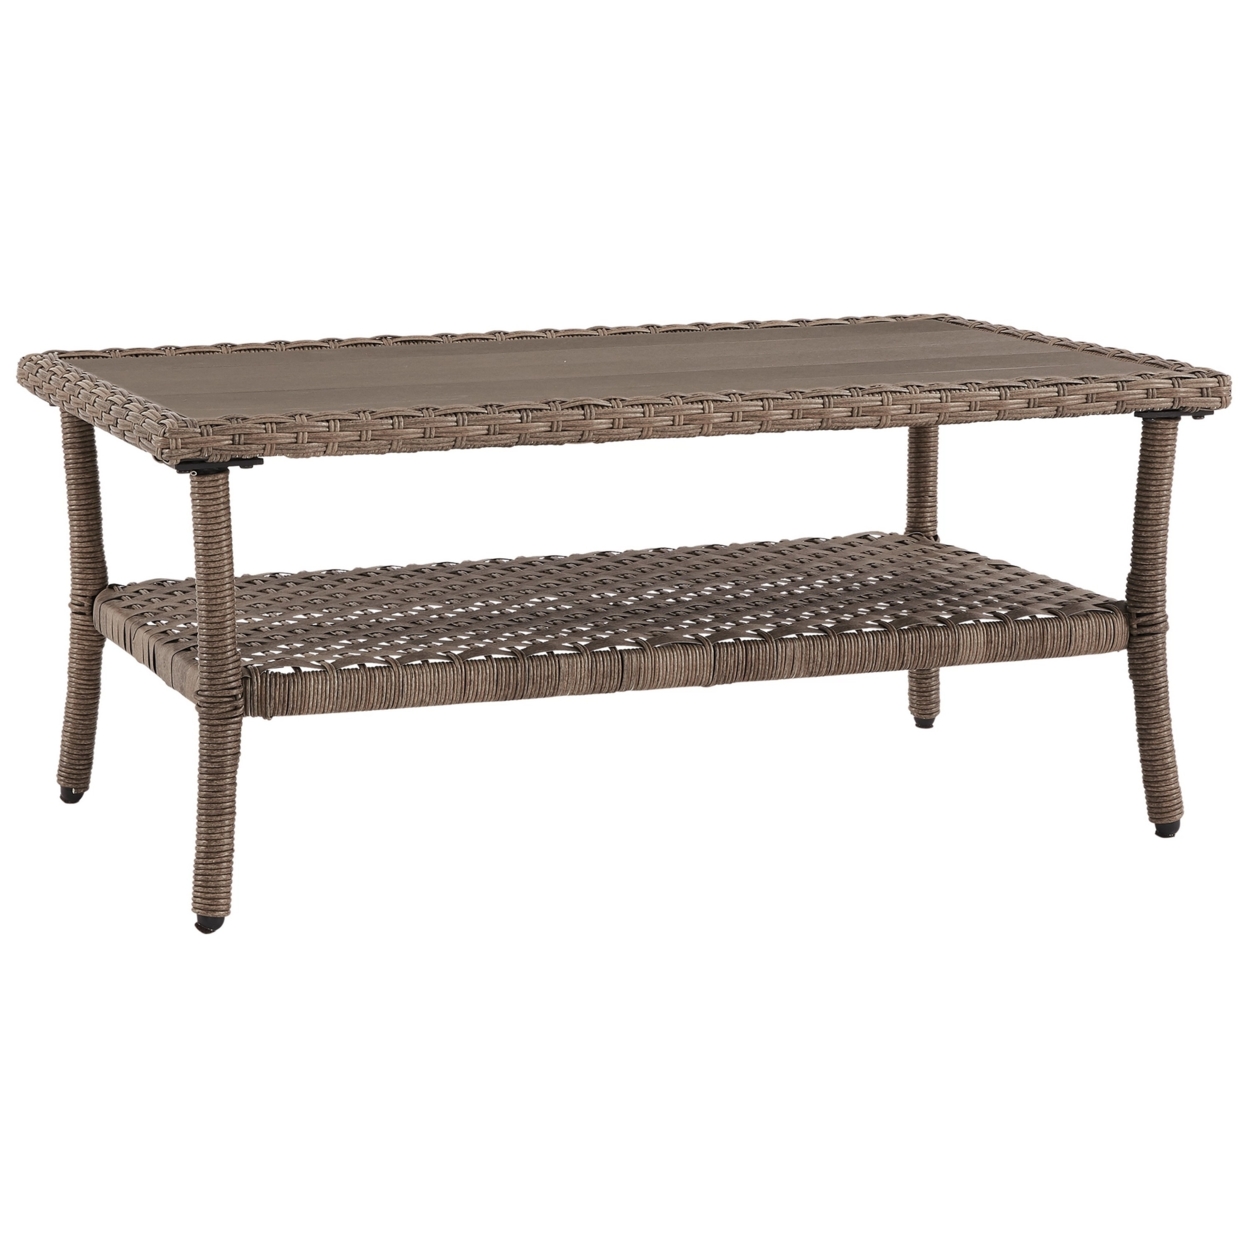 Cocktail Table With Woven Resin Top, Gray- Saltoro Sherpi